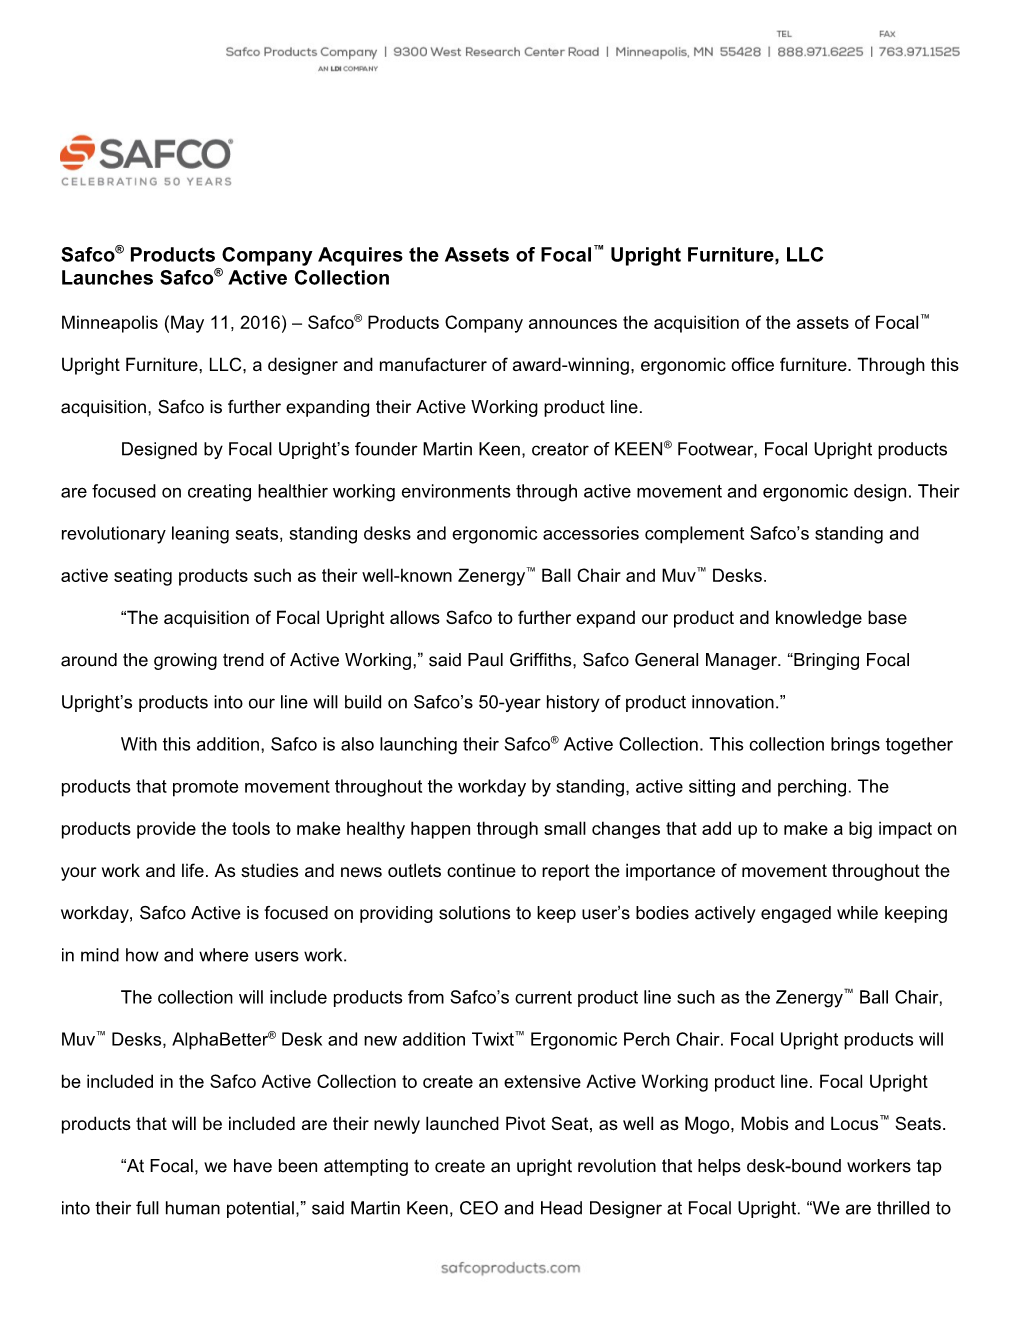 Safco Products Company Acquires the Assets of Focal Upright Furniture, LLC